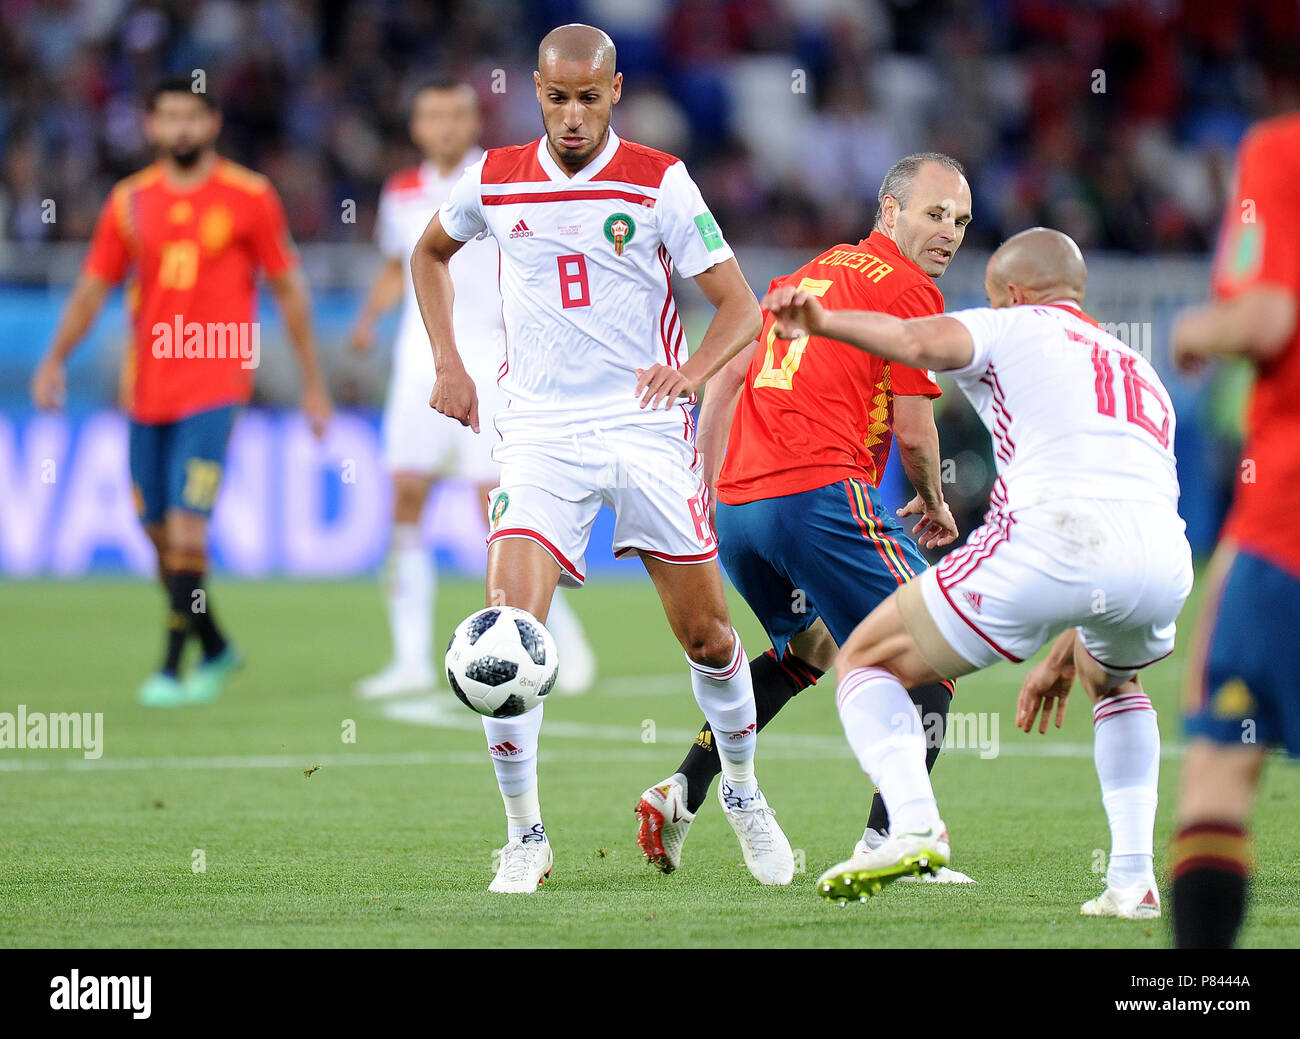 KALININGRAD, RUSSIA - JUNE 25: Andres Iniesta of Spain competes with Karim El Ahmadi of Morocco during the 2018 FIFA World Cup Russia group B match between Spain and Morocco at Kaliningrad Stadium on June 25, 2018 in Kaliningrad, Russia. (Photo by Norbert Barczyk/PressFocus/MB Media) Stock Photo